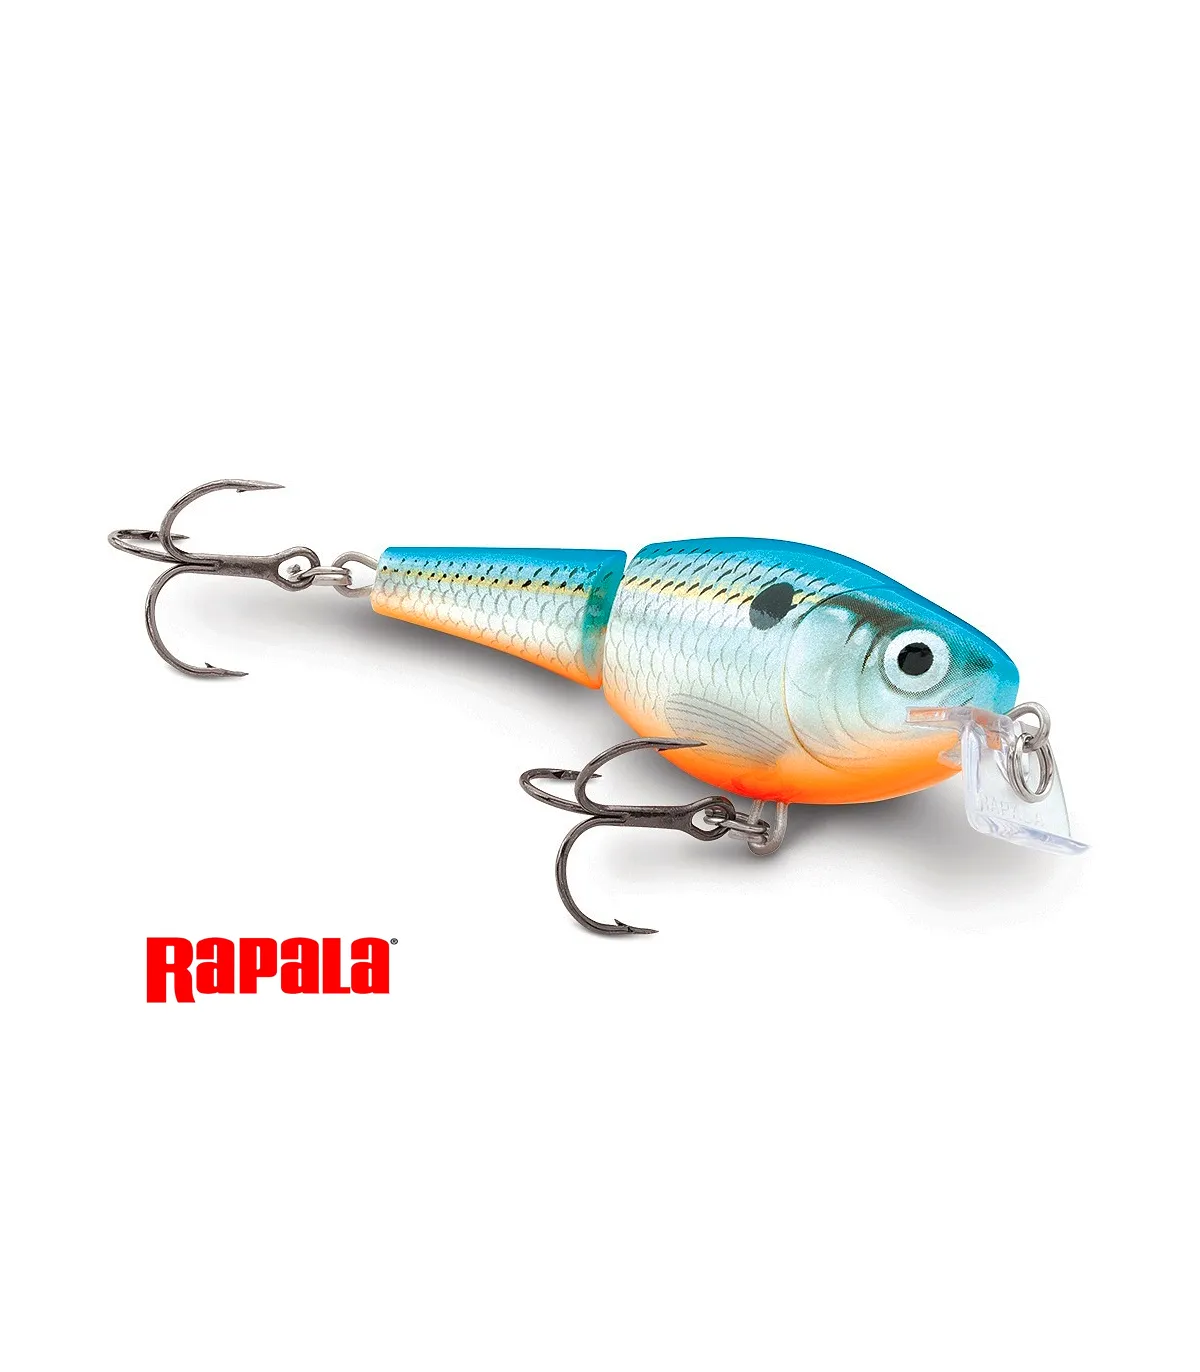 Rapala Jointed Shallow Shad Rap lures